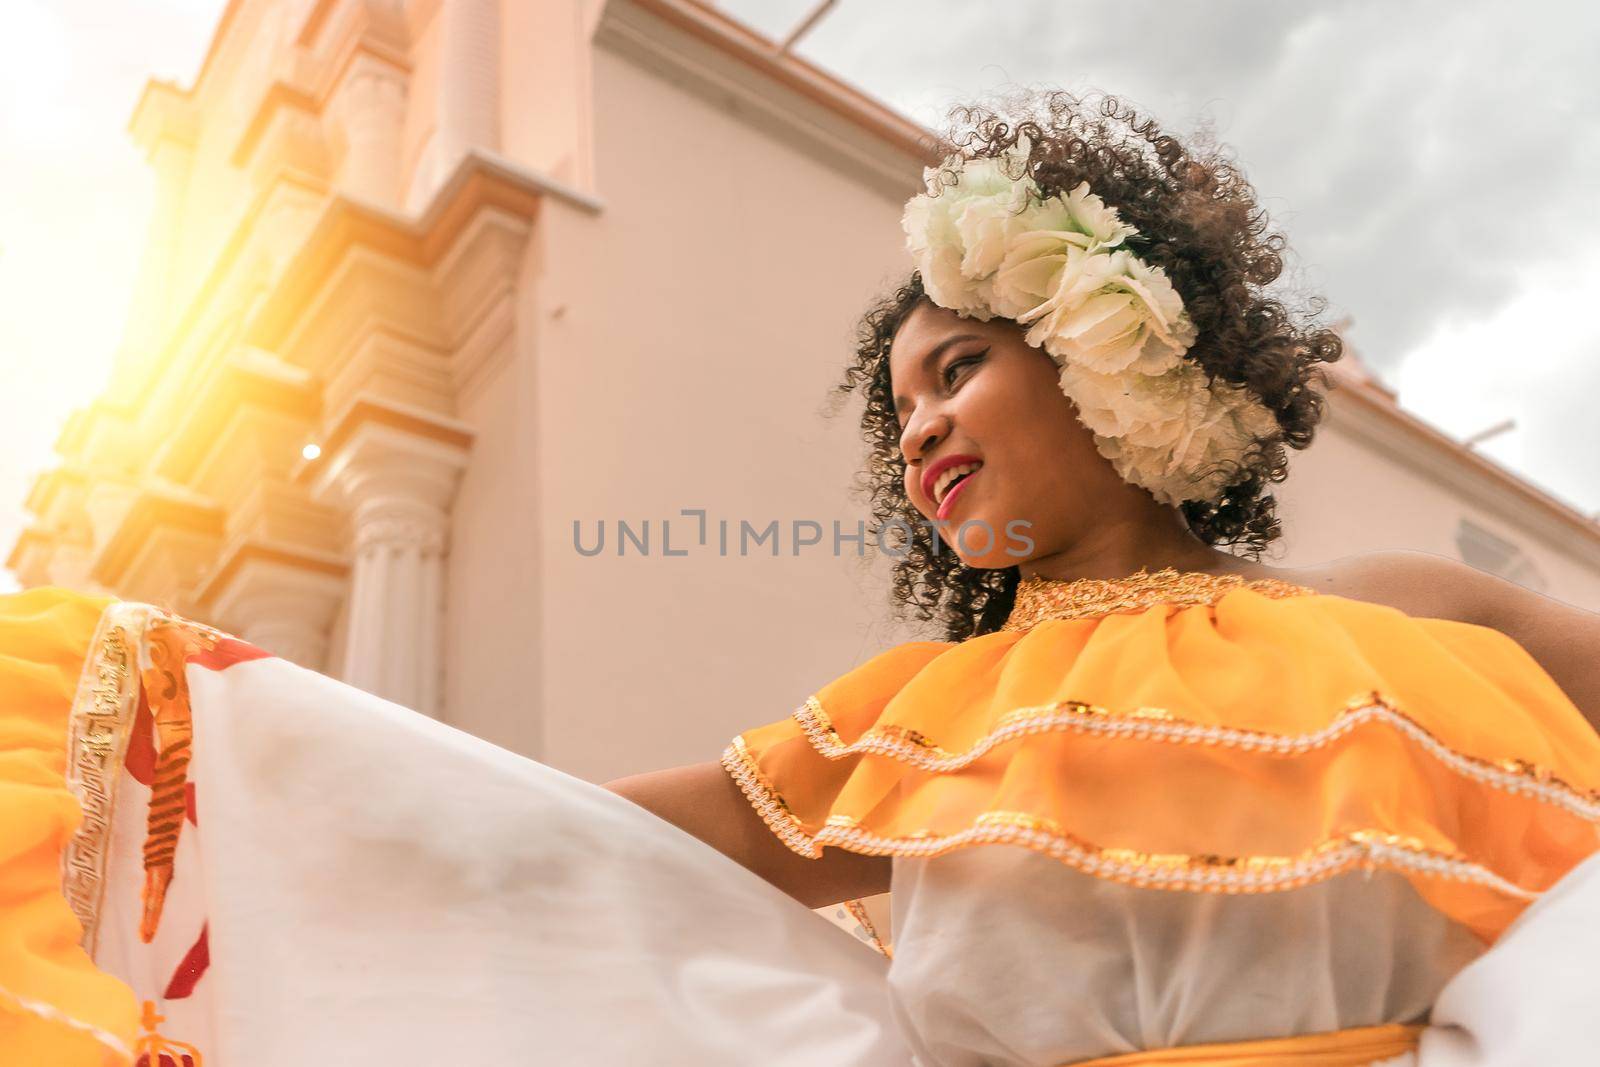 Traditional curly-haired mestizo dancer with a typical Nicaraguan costume dancing outside the cathedral of Leon Nicaragua celebrating the independence festivities